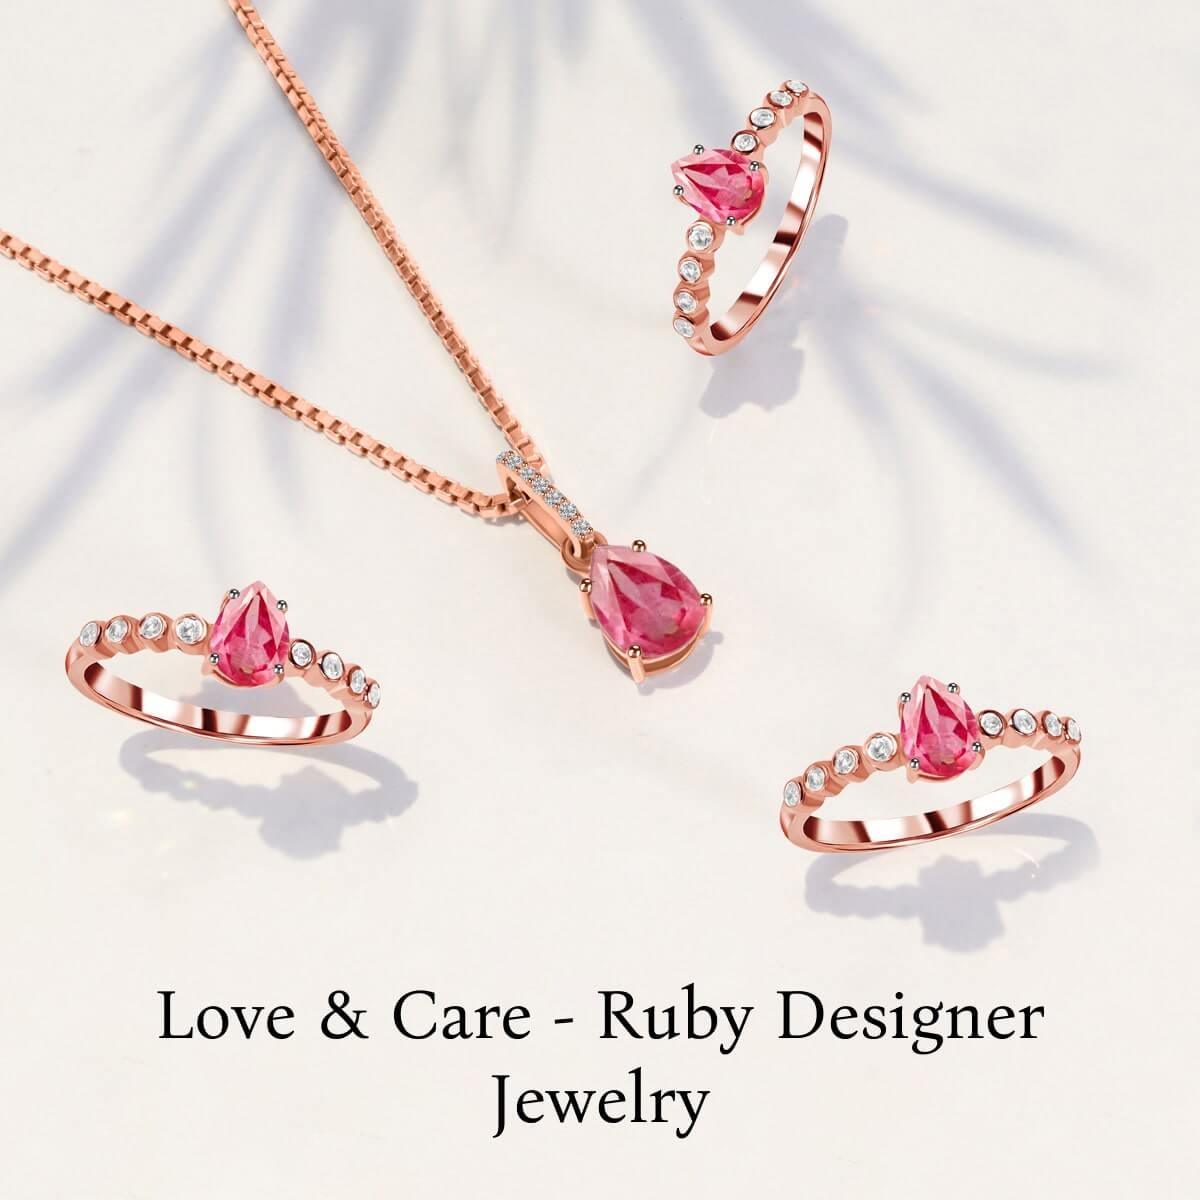 Caring for Ruby Designer Jewelry